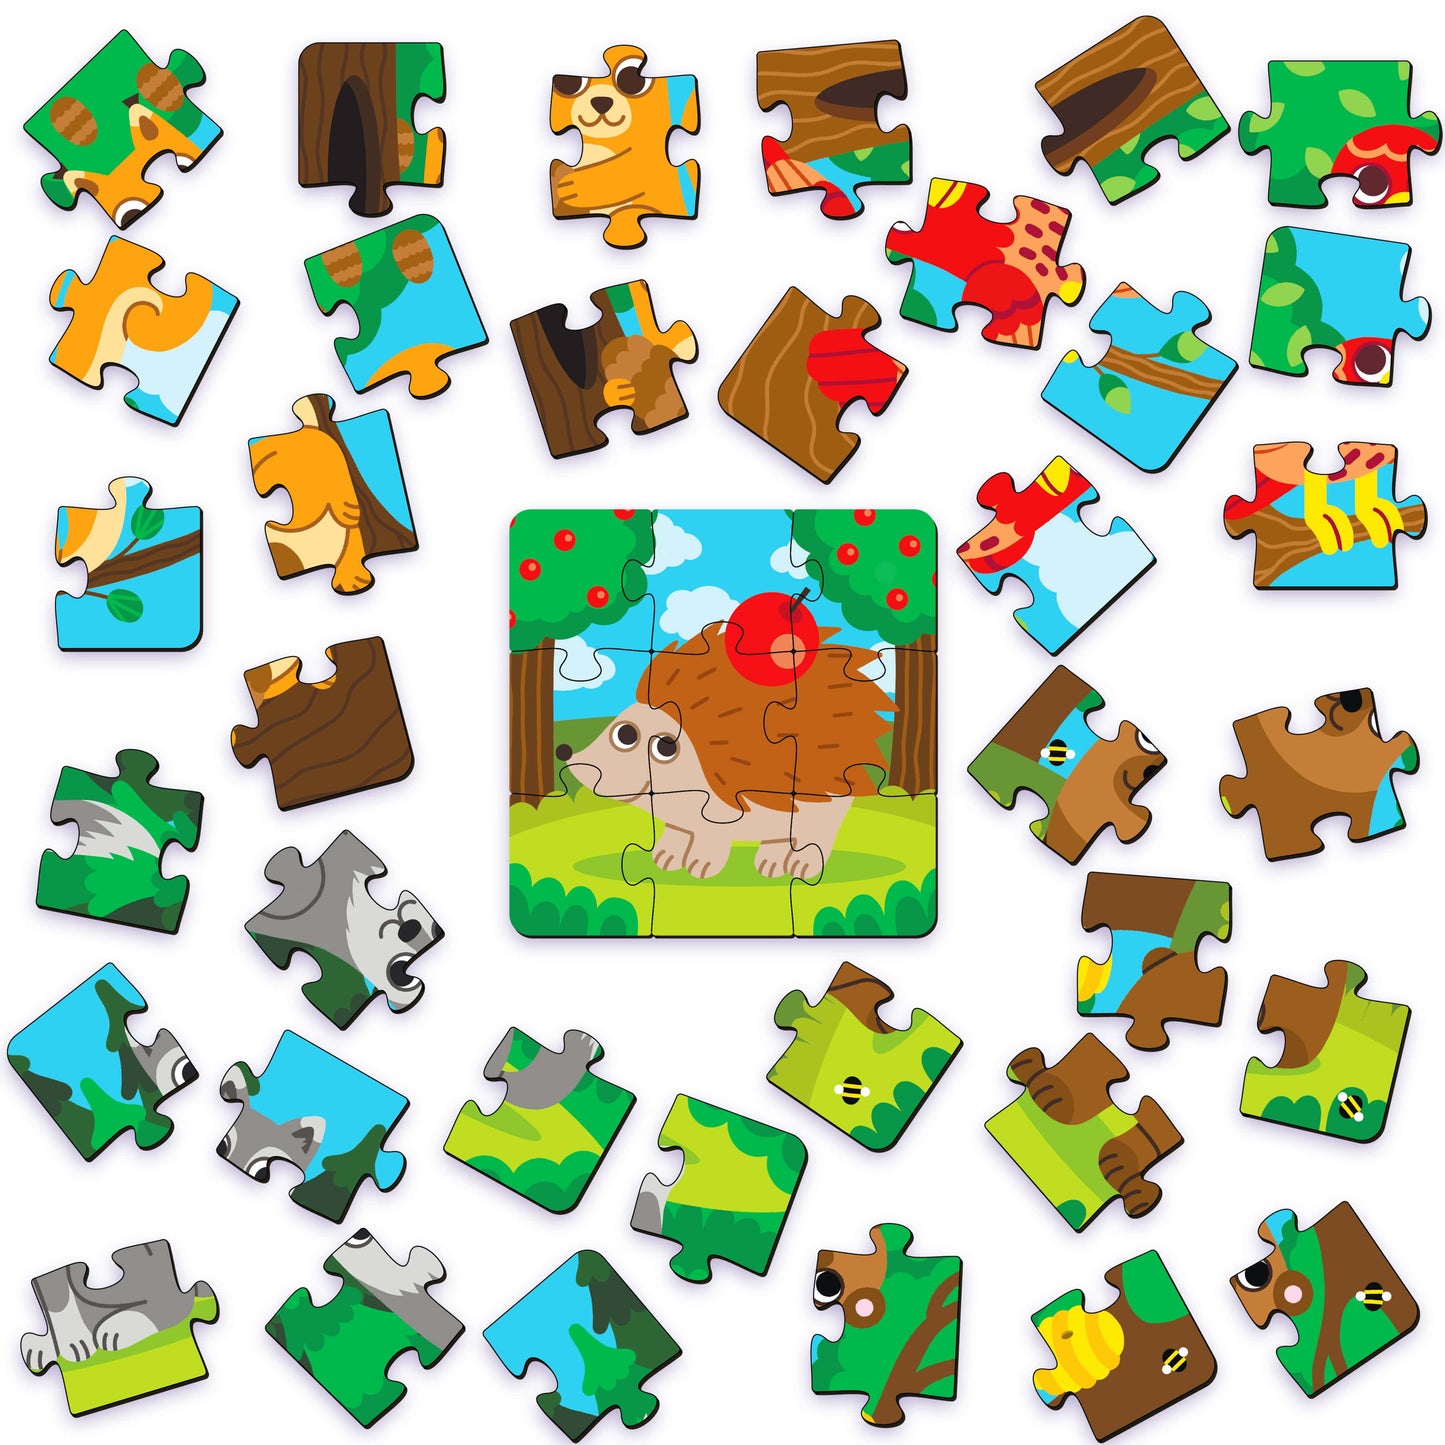 Forest Animals Wooden Puzzle Active Puzzles